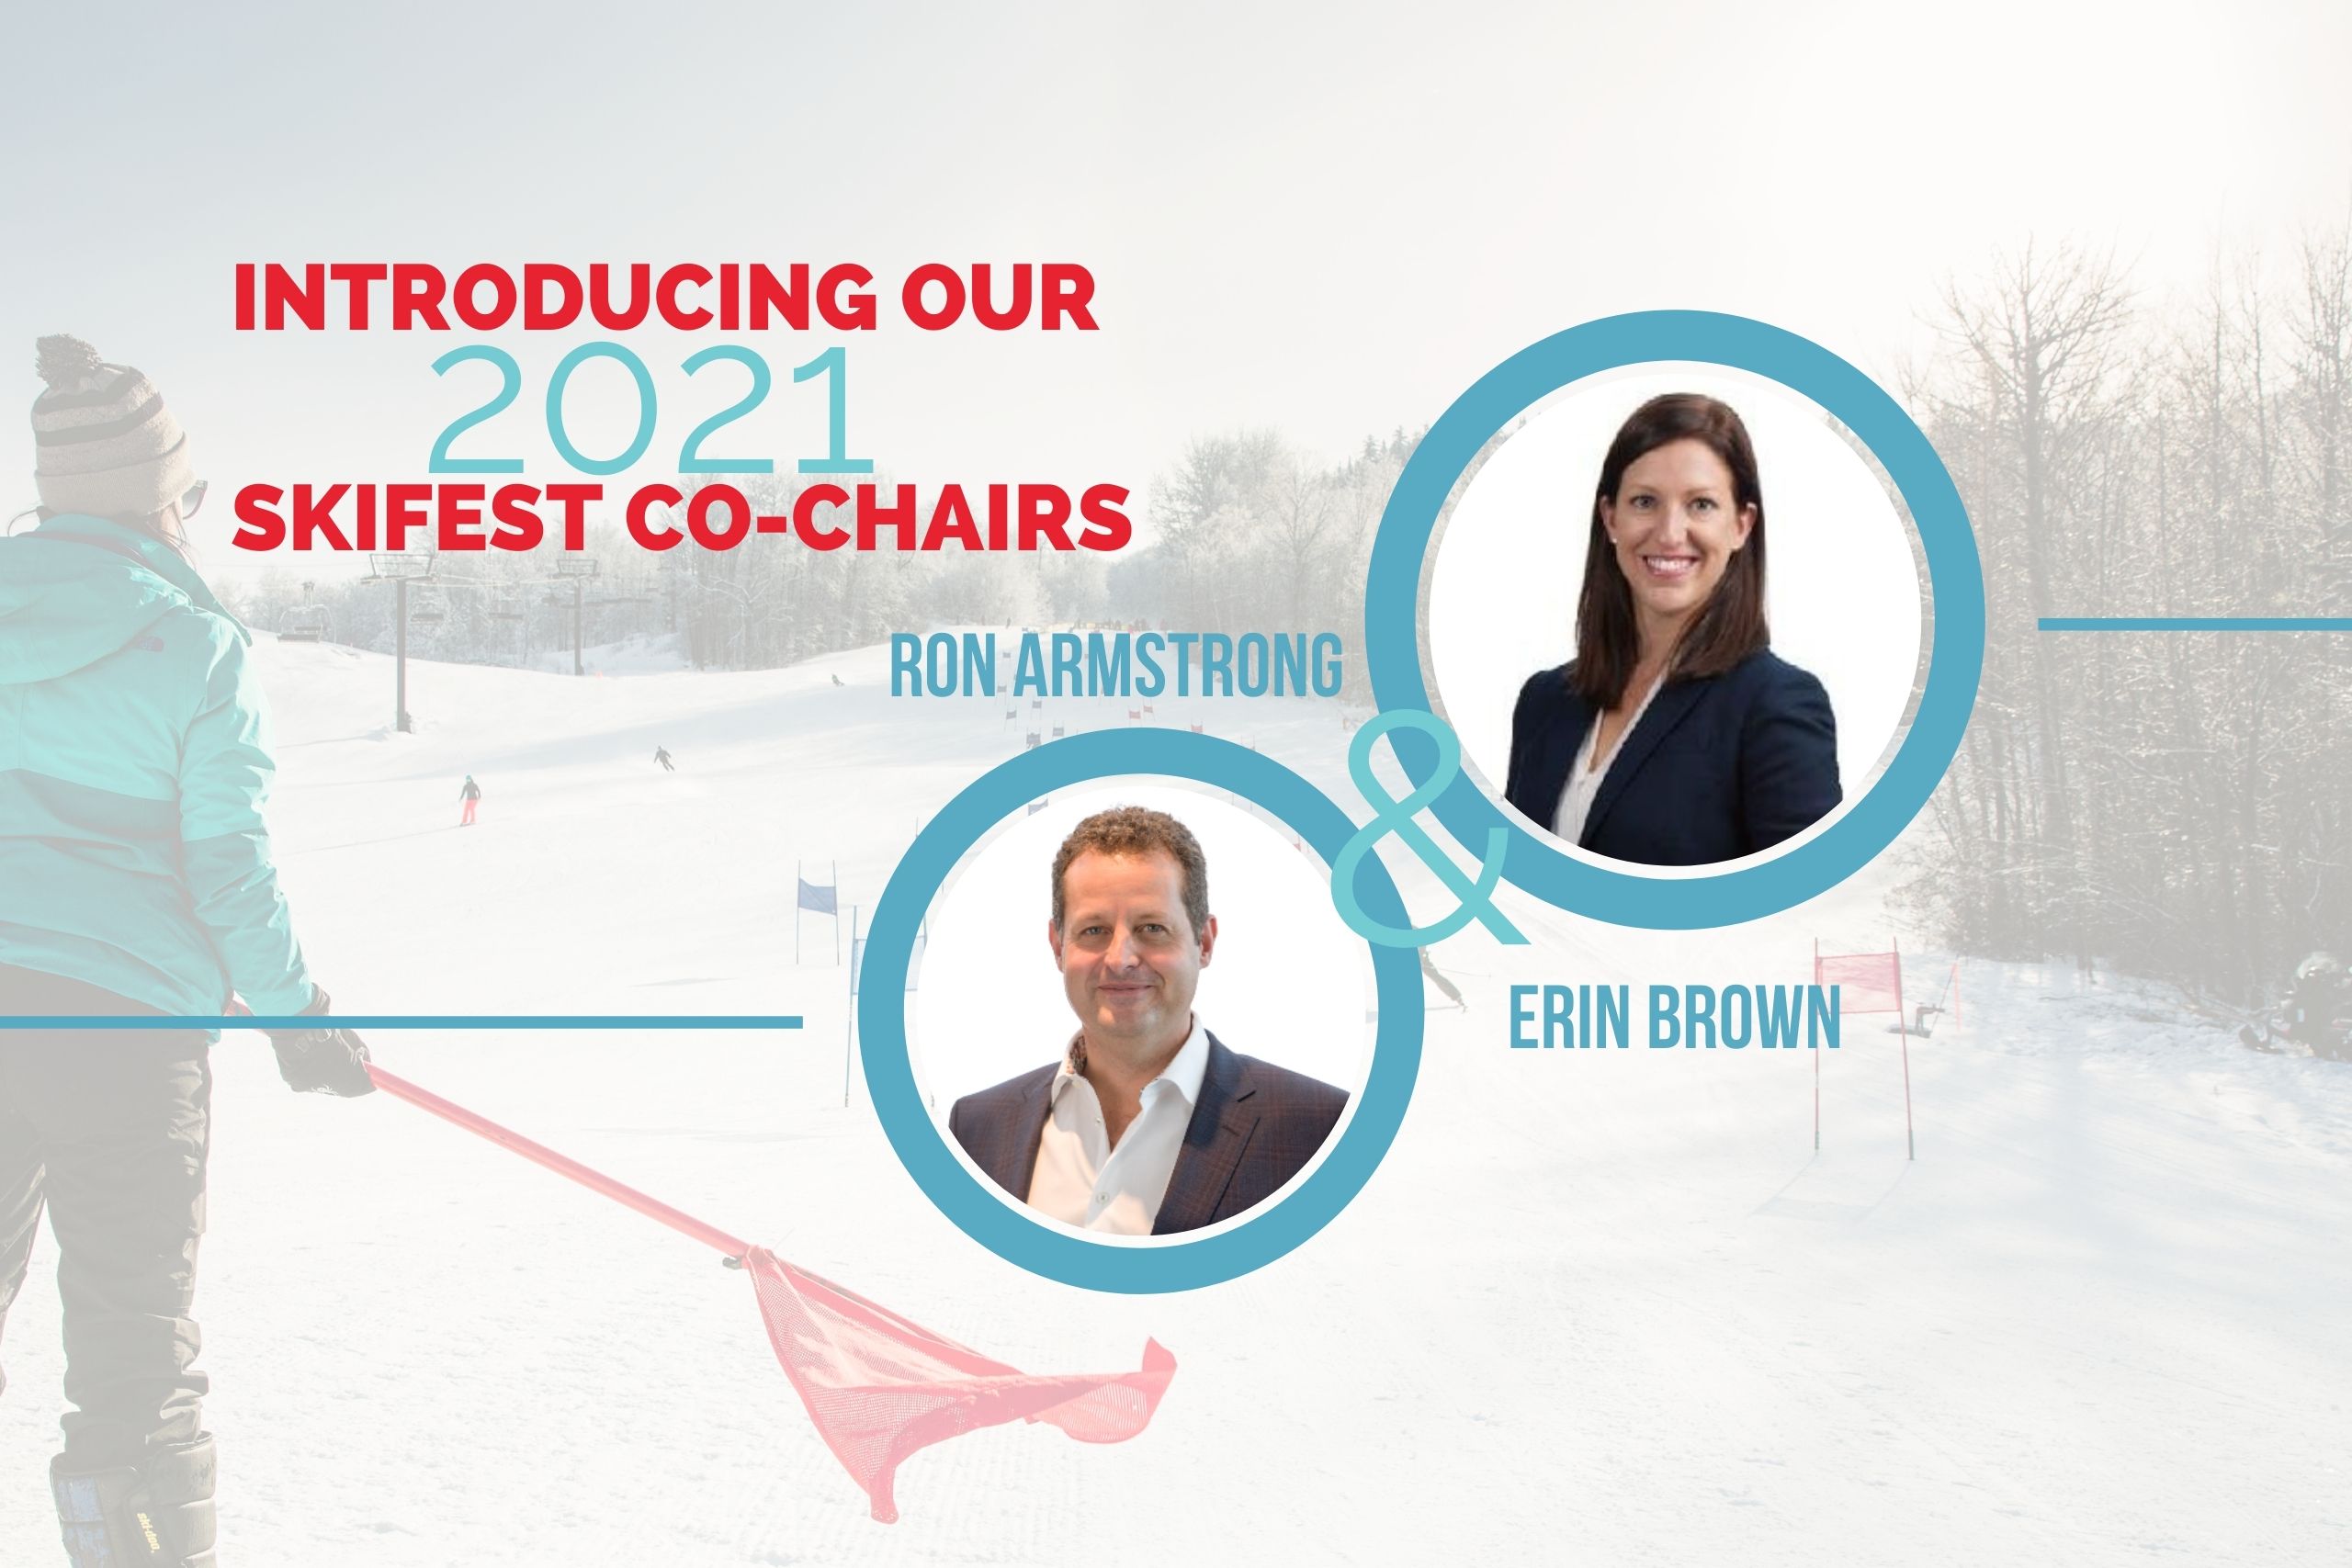 Meet Skifest 2021 Co-Chairs: Ron Armstrong and Erin Brown